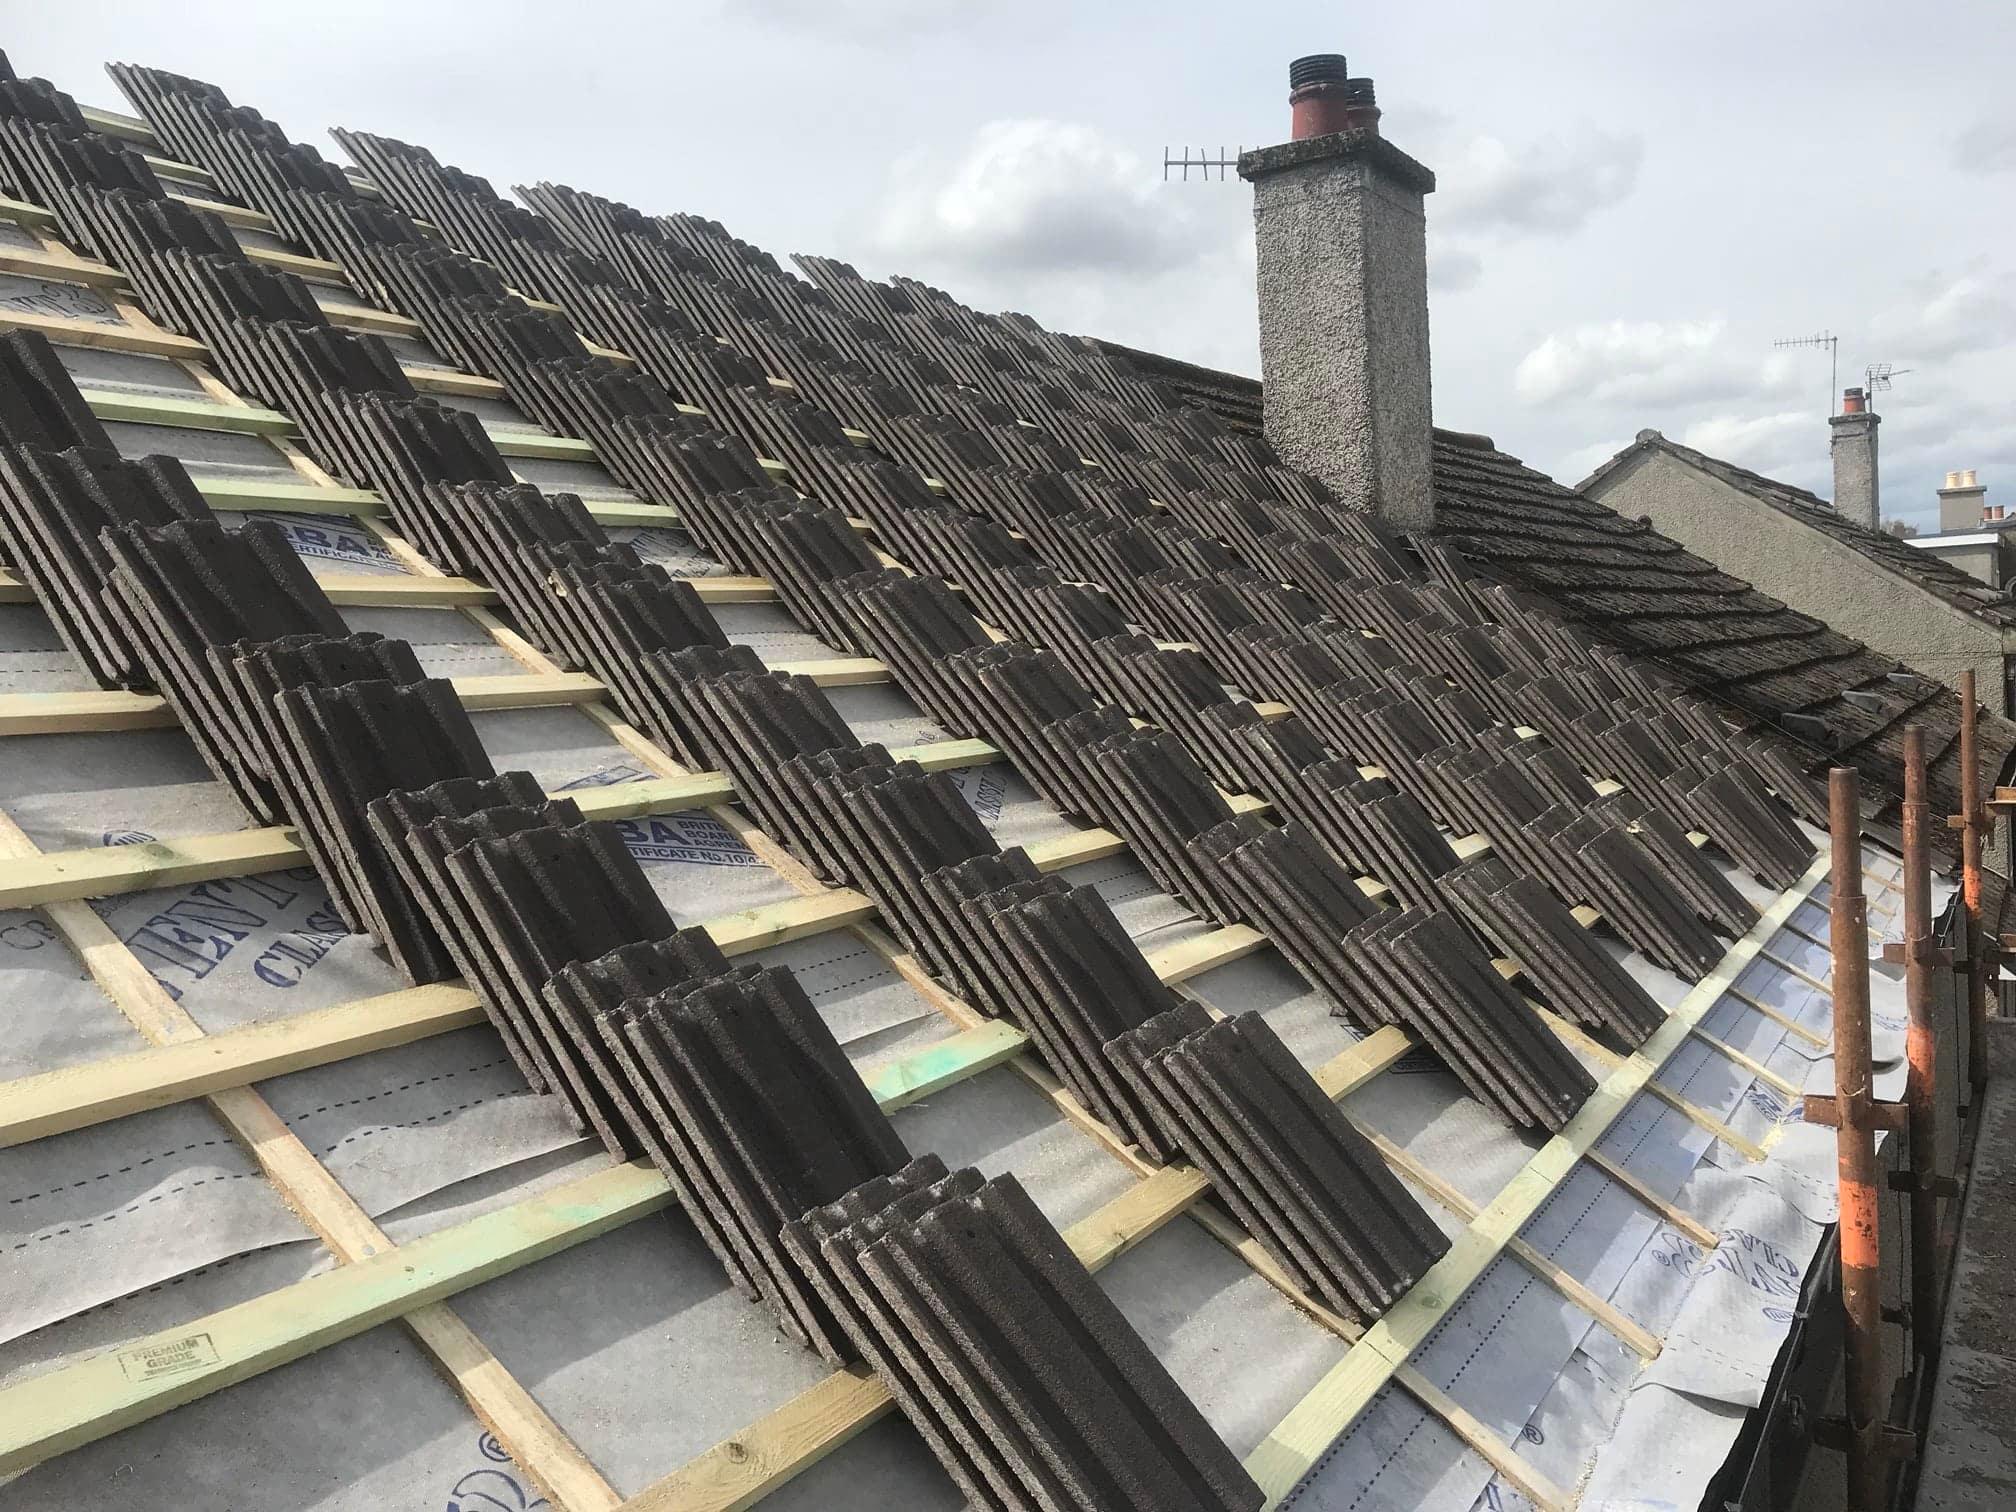 Images John Mclean Roofing